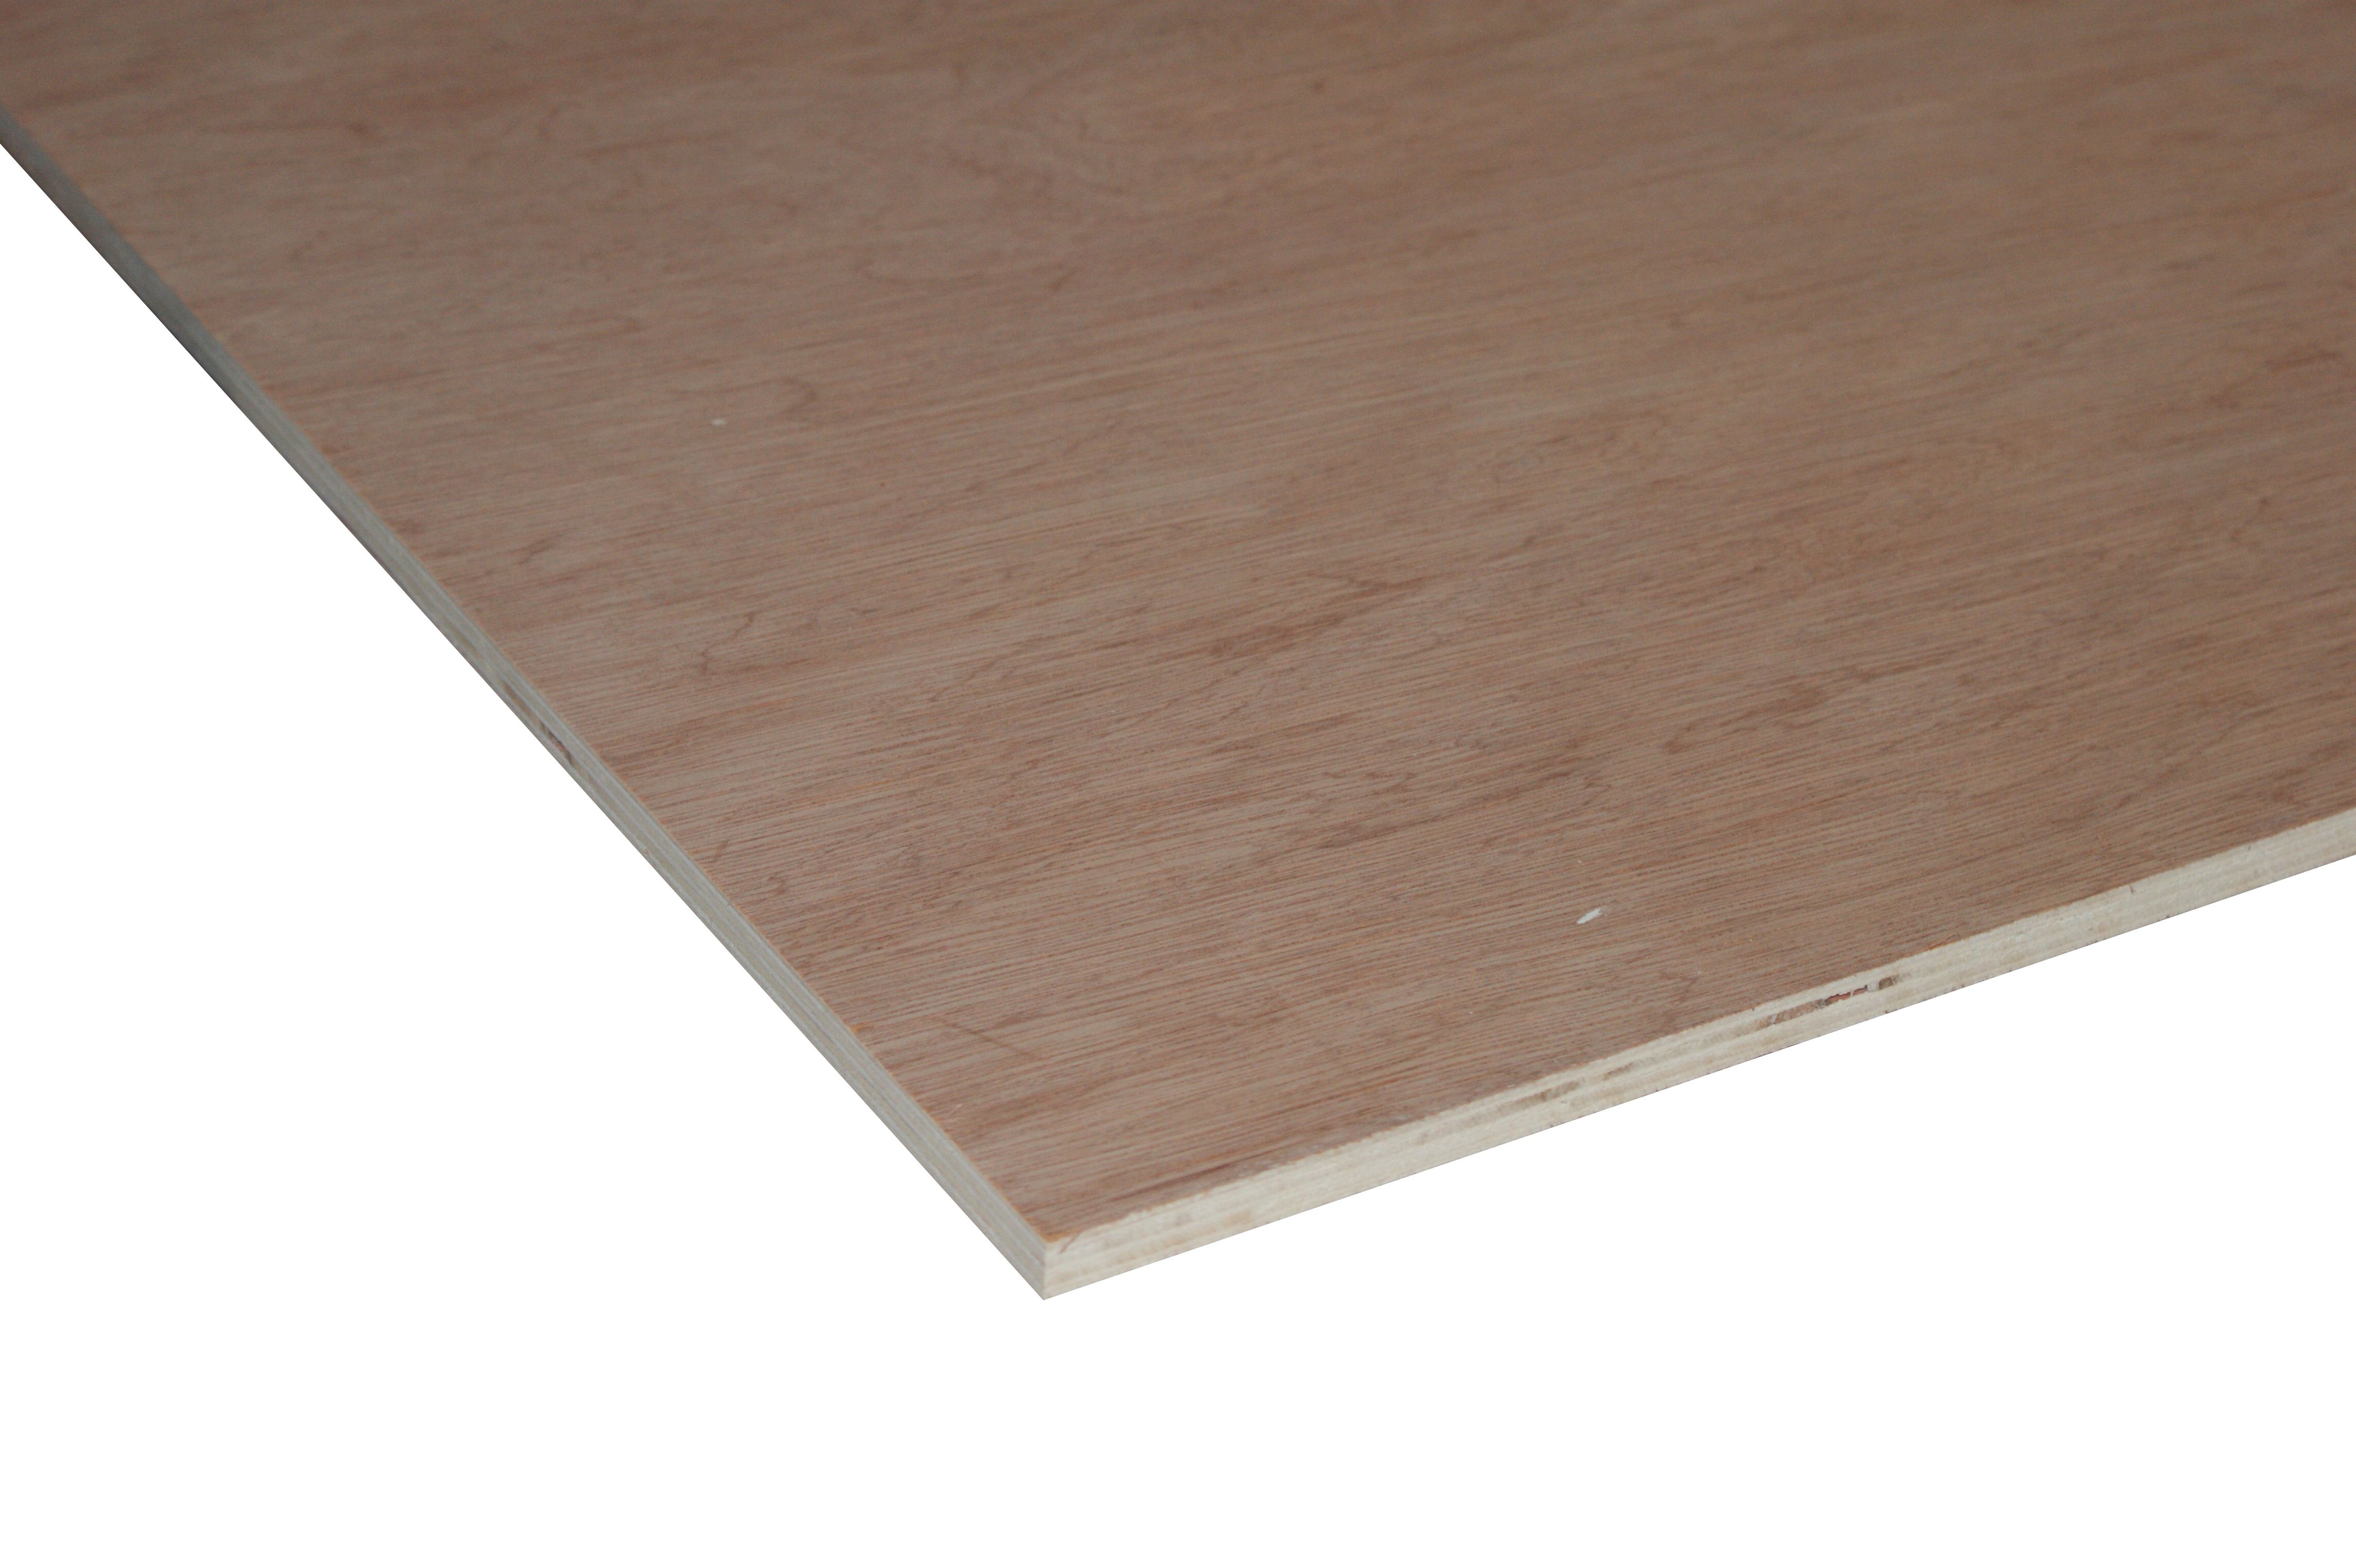 Image of Wickes Non-Structural Hardwood Plywood - 3.6 x 607 x 1829mm